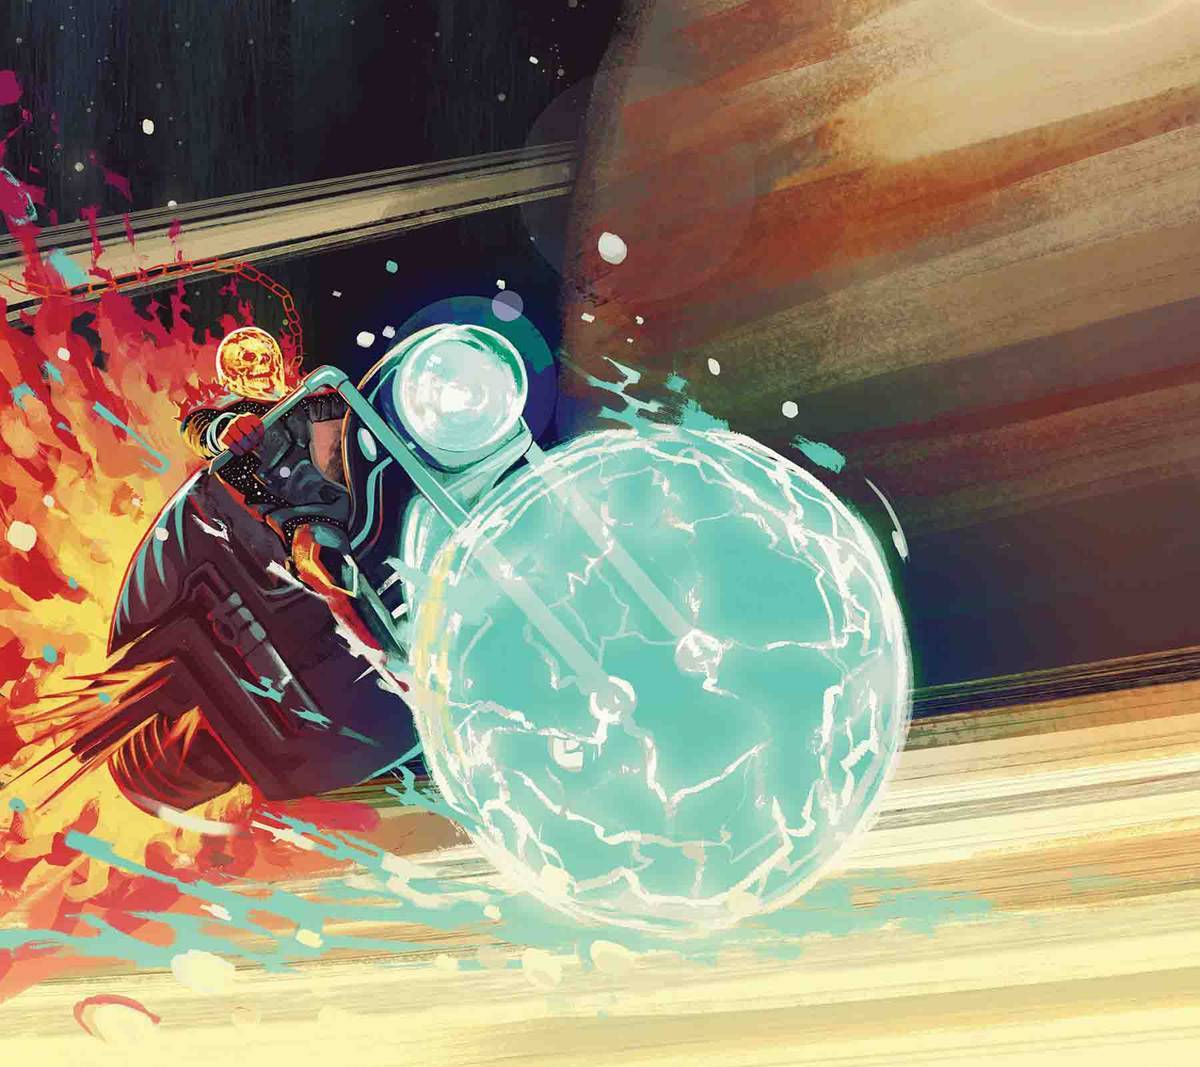 Cosmic Ghost Rider #1 Review